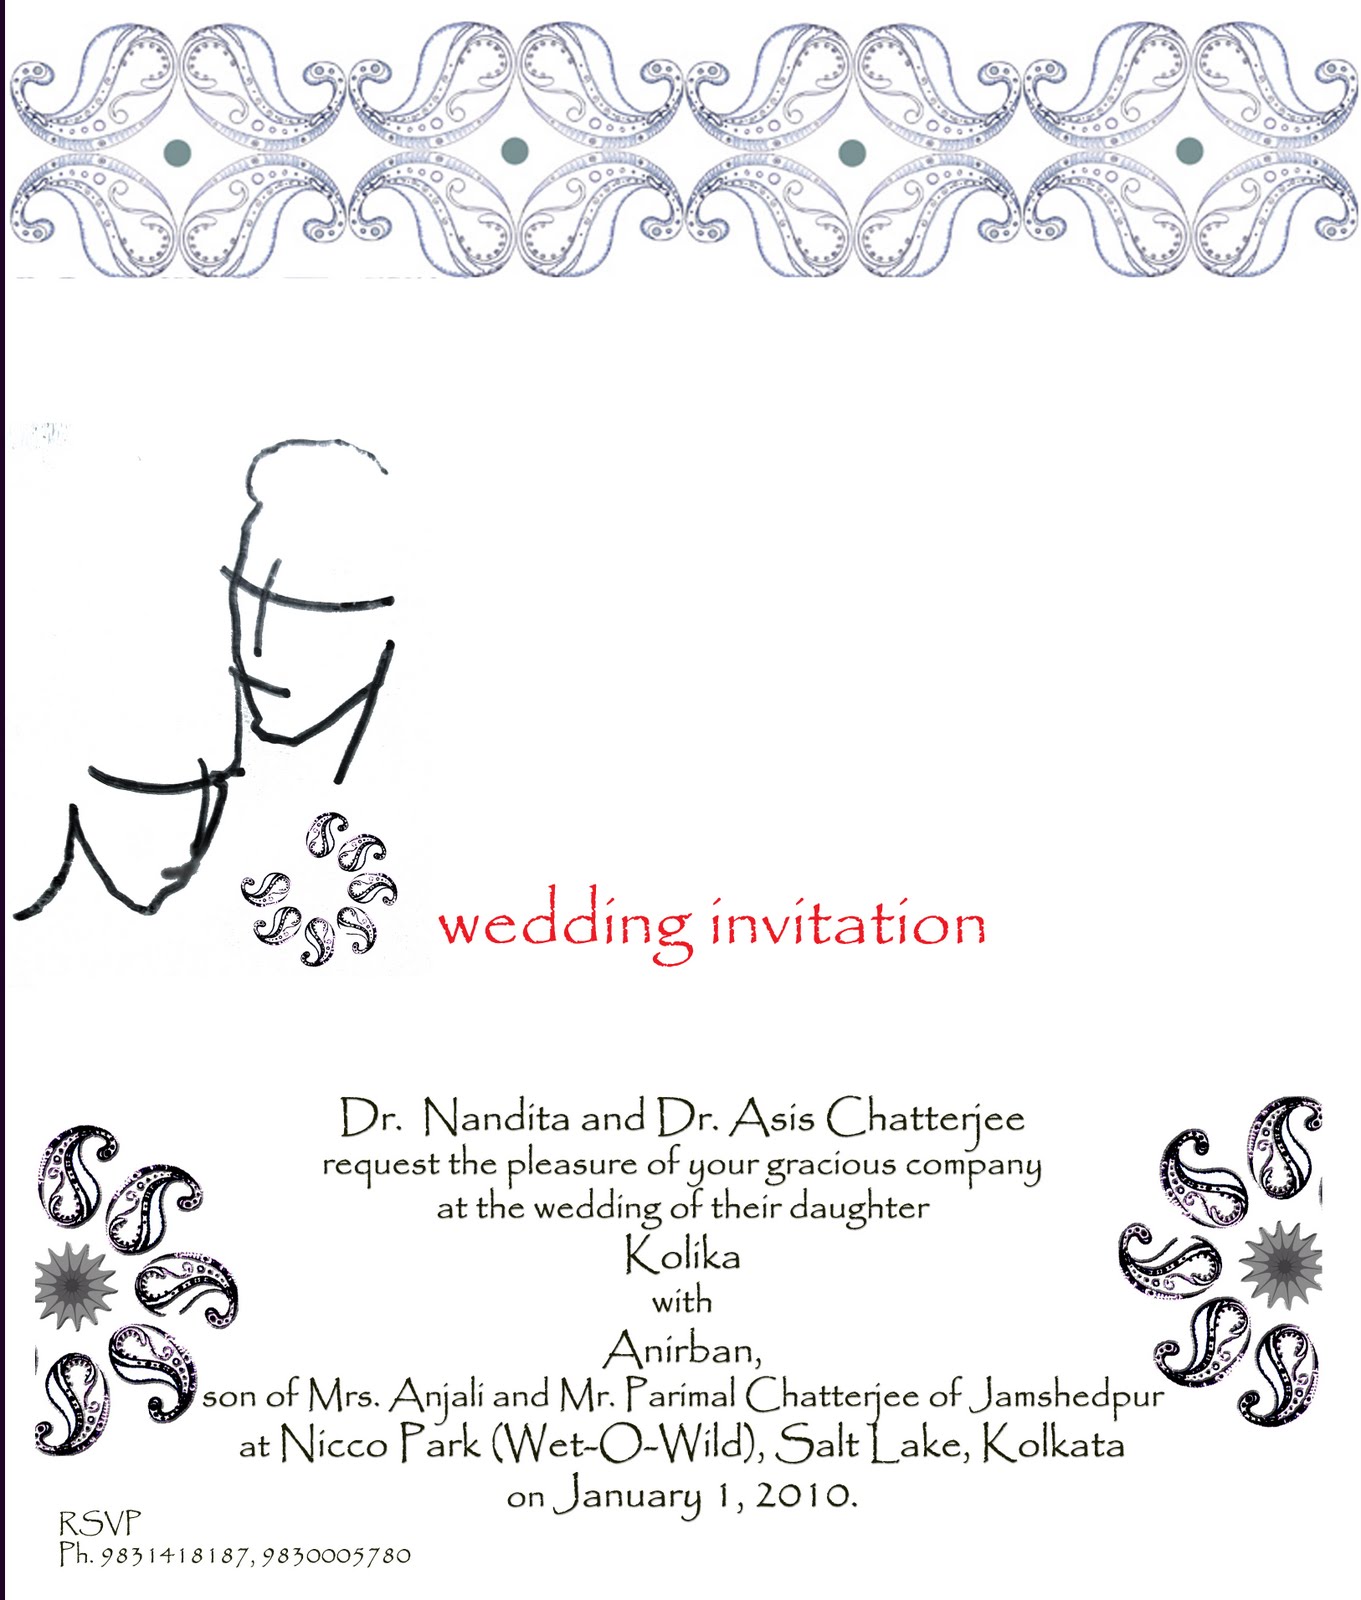 Search Orther Website : 60th wedding anniversary invitation ideas howthing